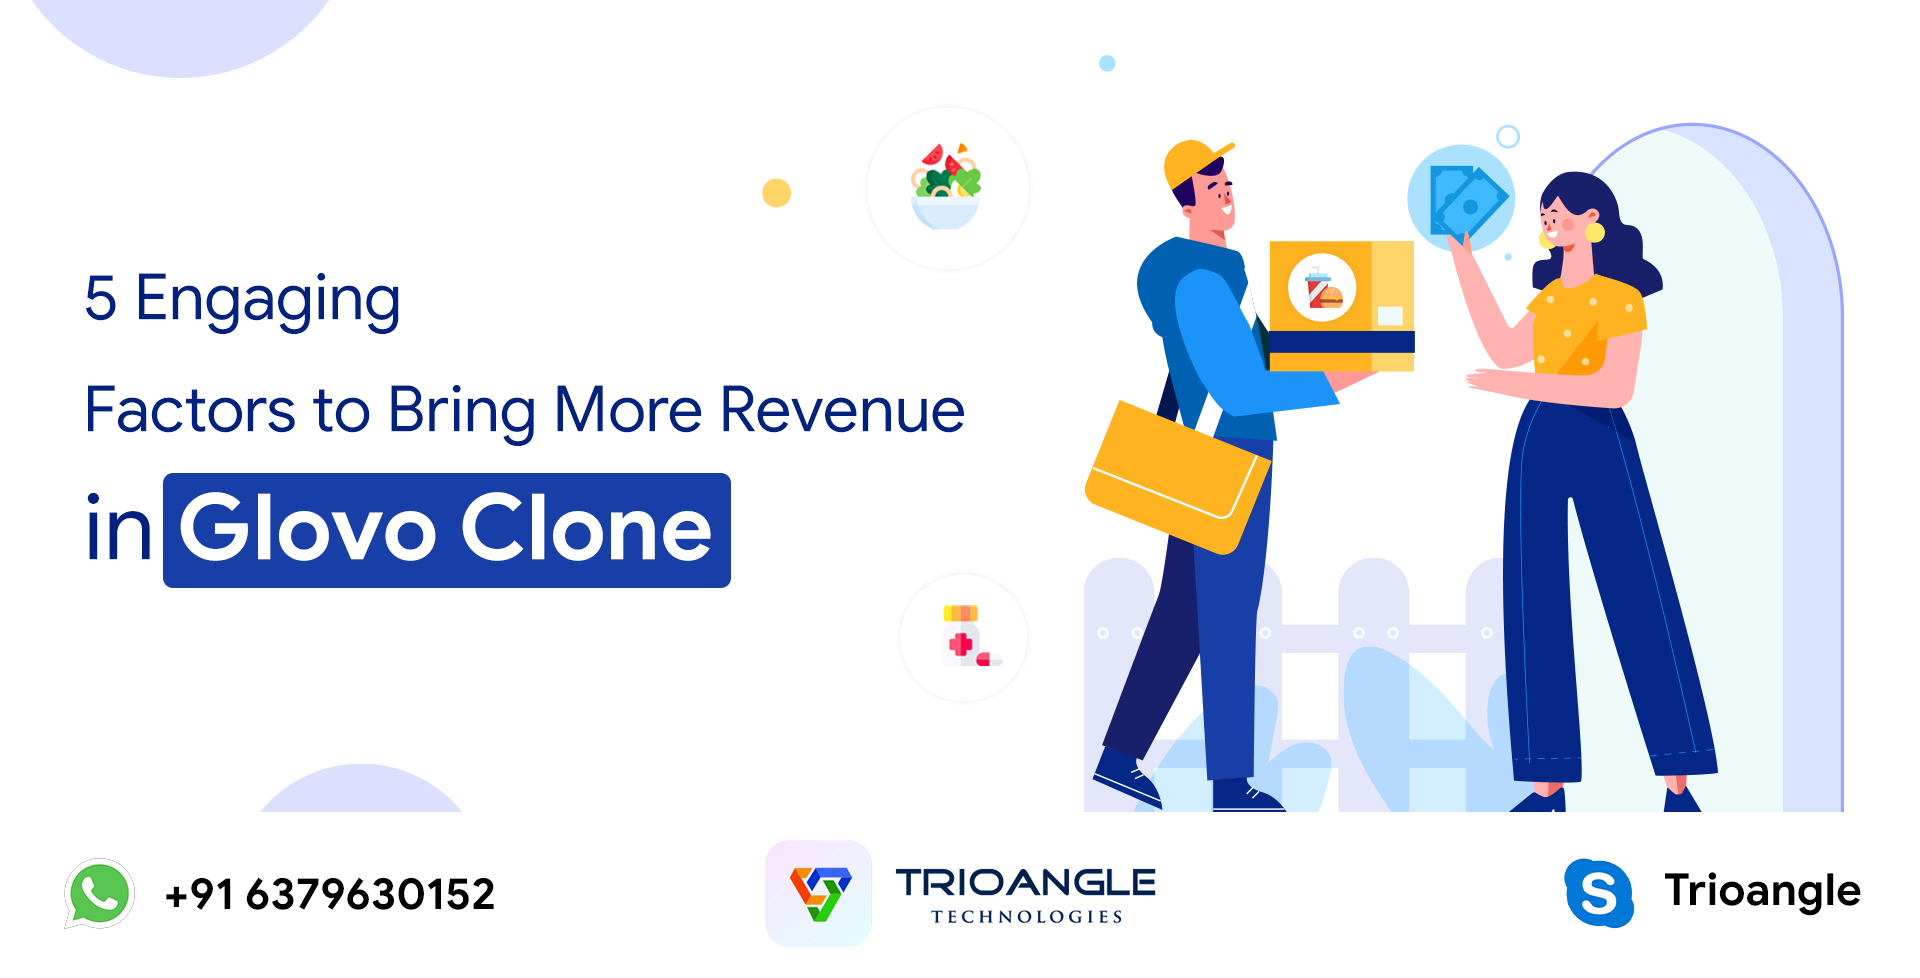 5 Engaging Factors to Bring More Revenue in Glovo Clone